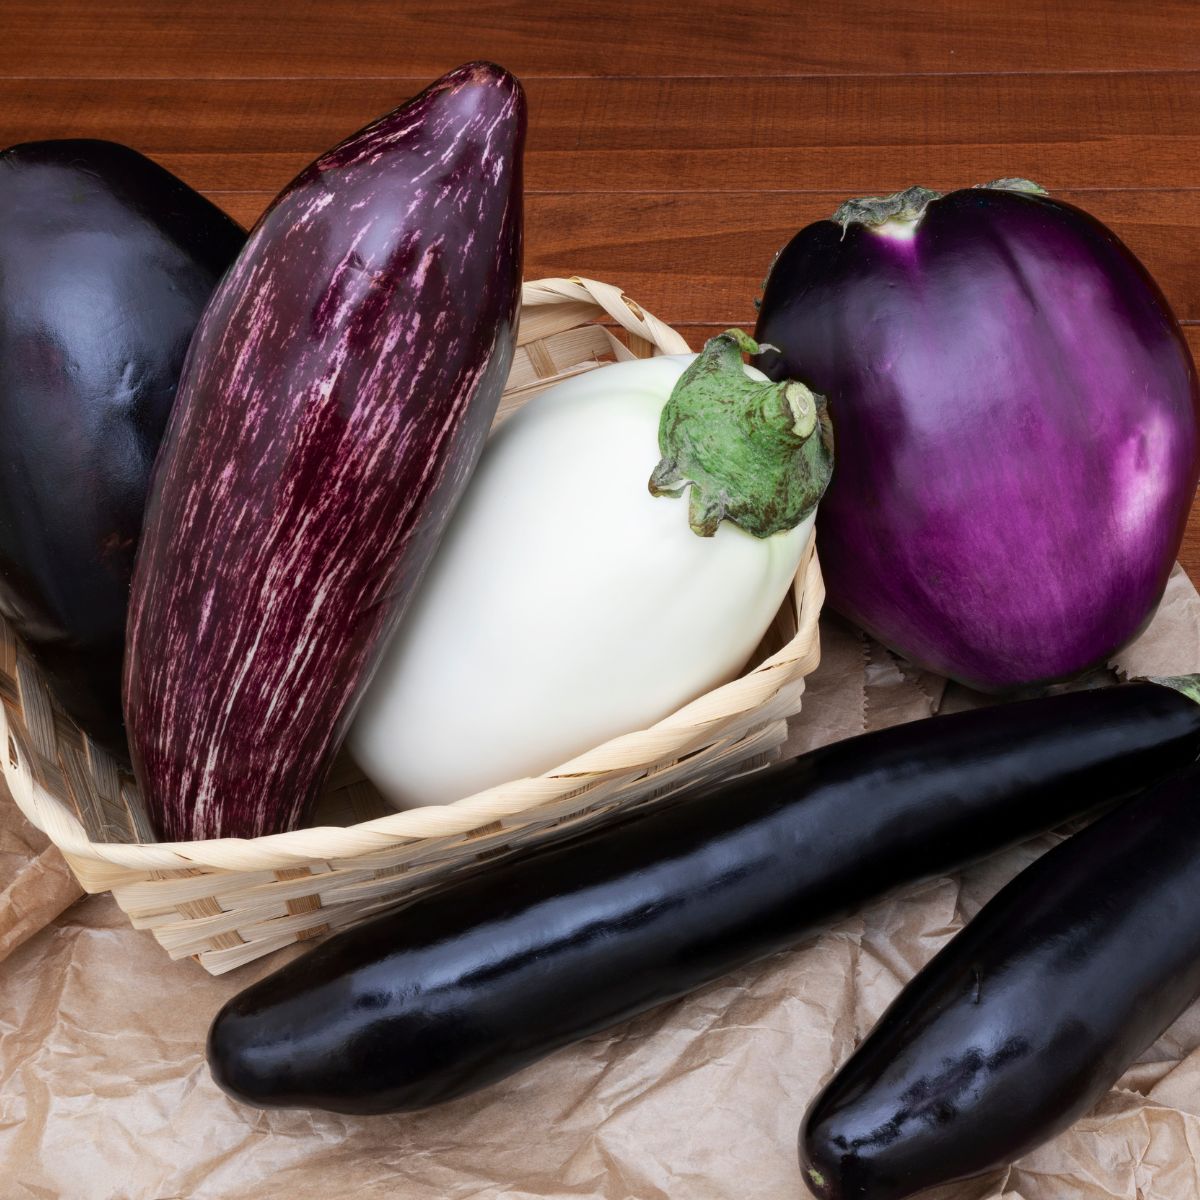 Several varieties of eggplant: long and skinny, white, and striped. 